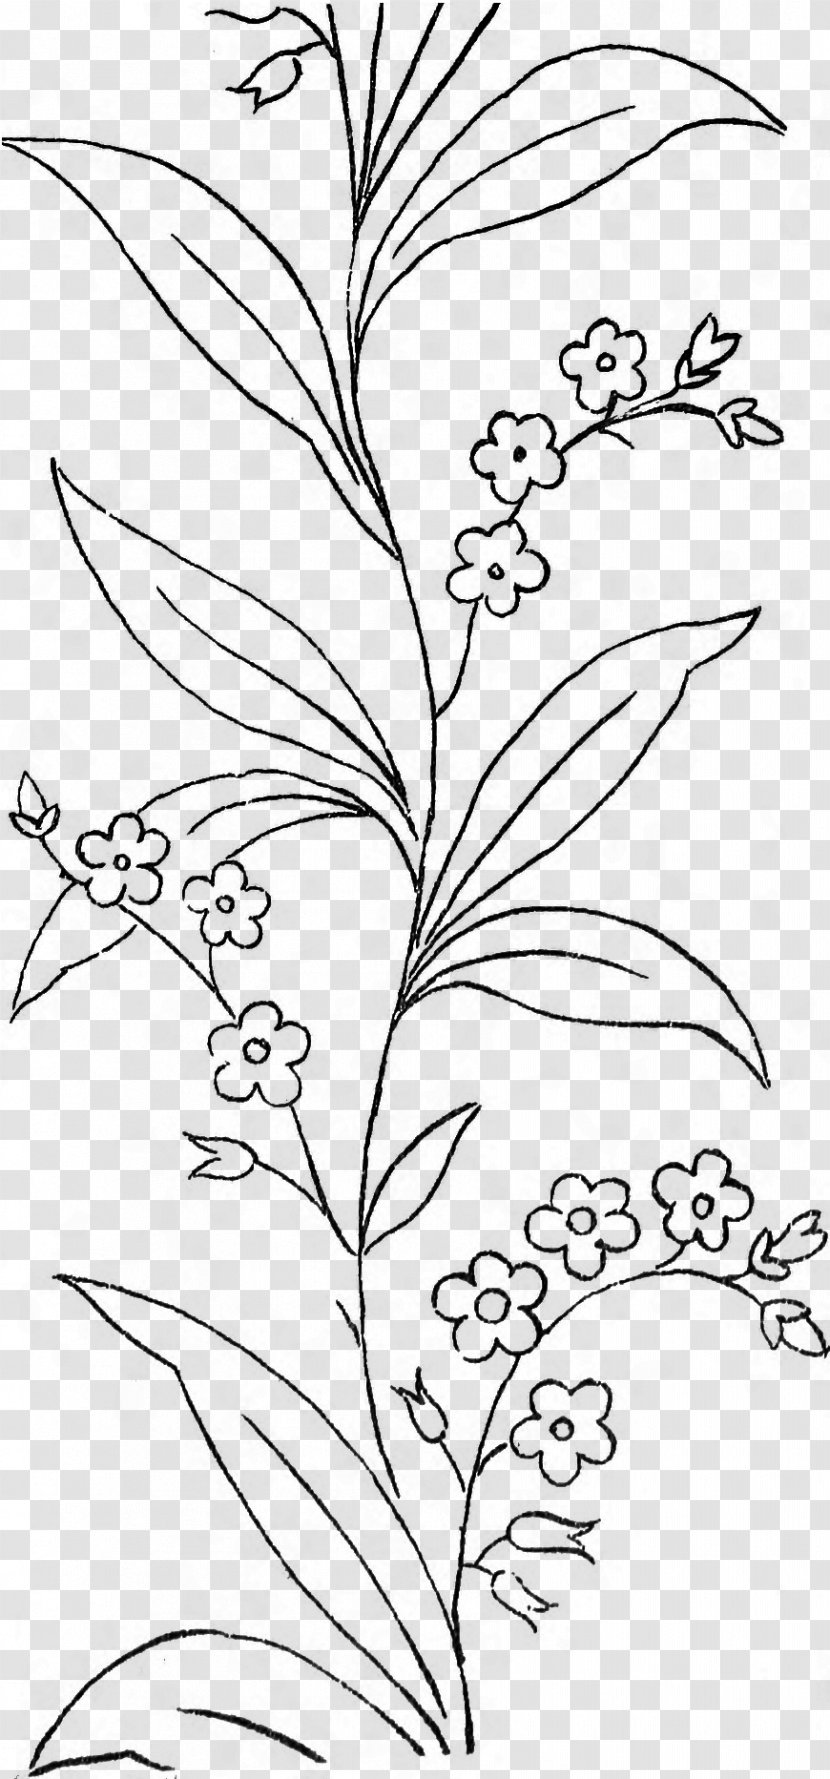 Black And White Leaf Line Art Drawing Coloring Book - Flora - Forget Me Not Transparent PNG